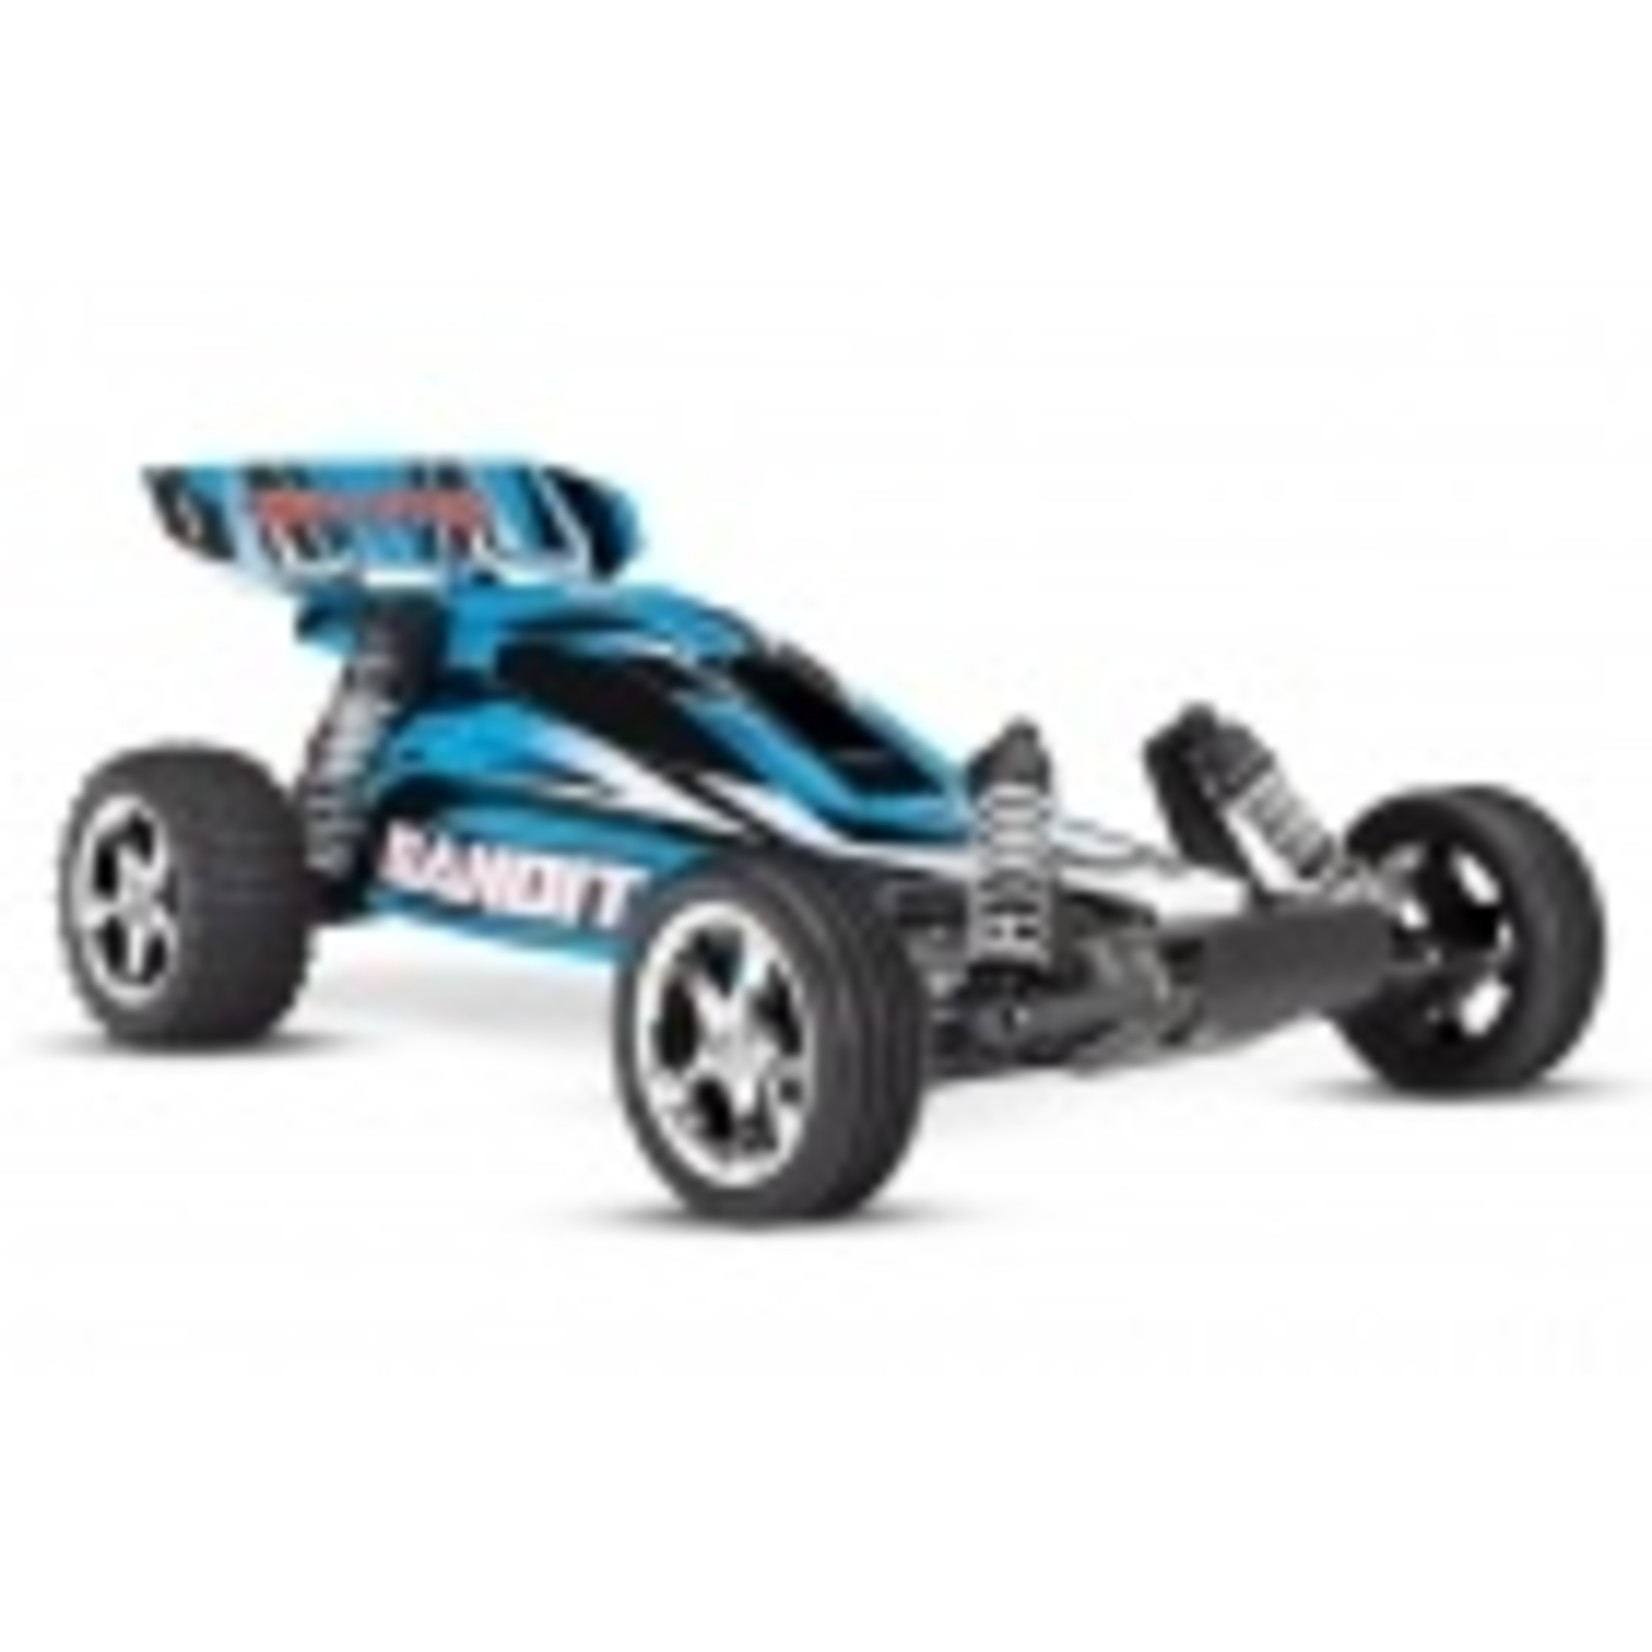 Traxxas 24054-1-BLUEX Bandit®: 1/10 Scale Off-Road Buggy with TQ™ 2.4GHz radio system